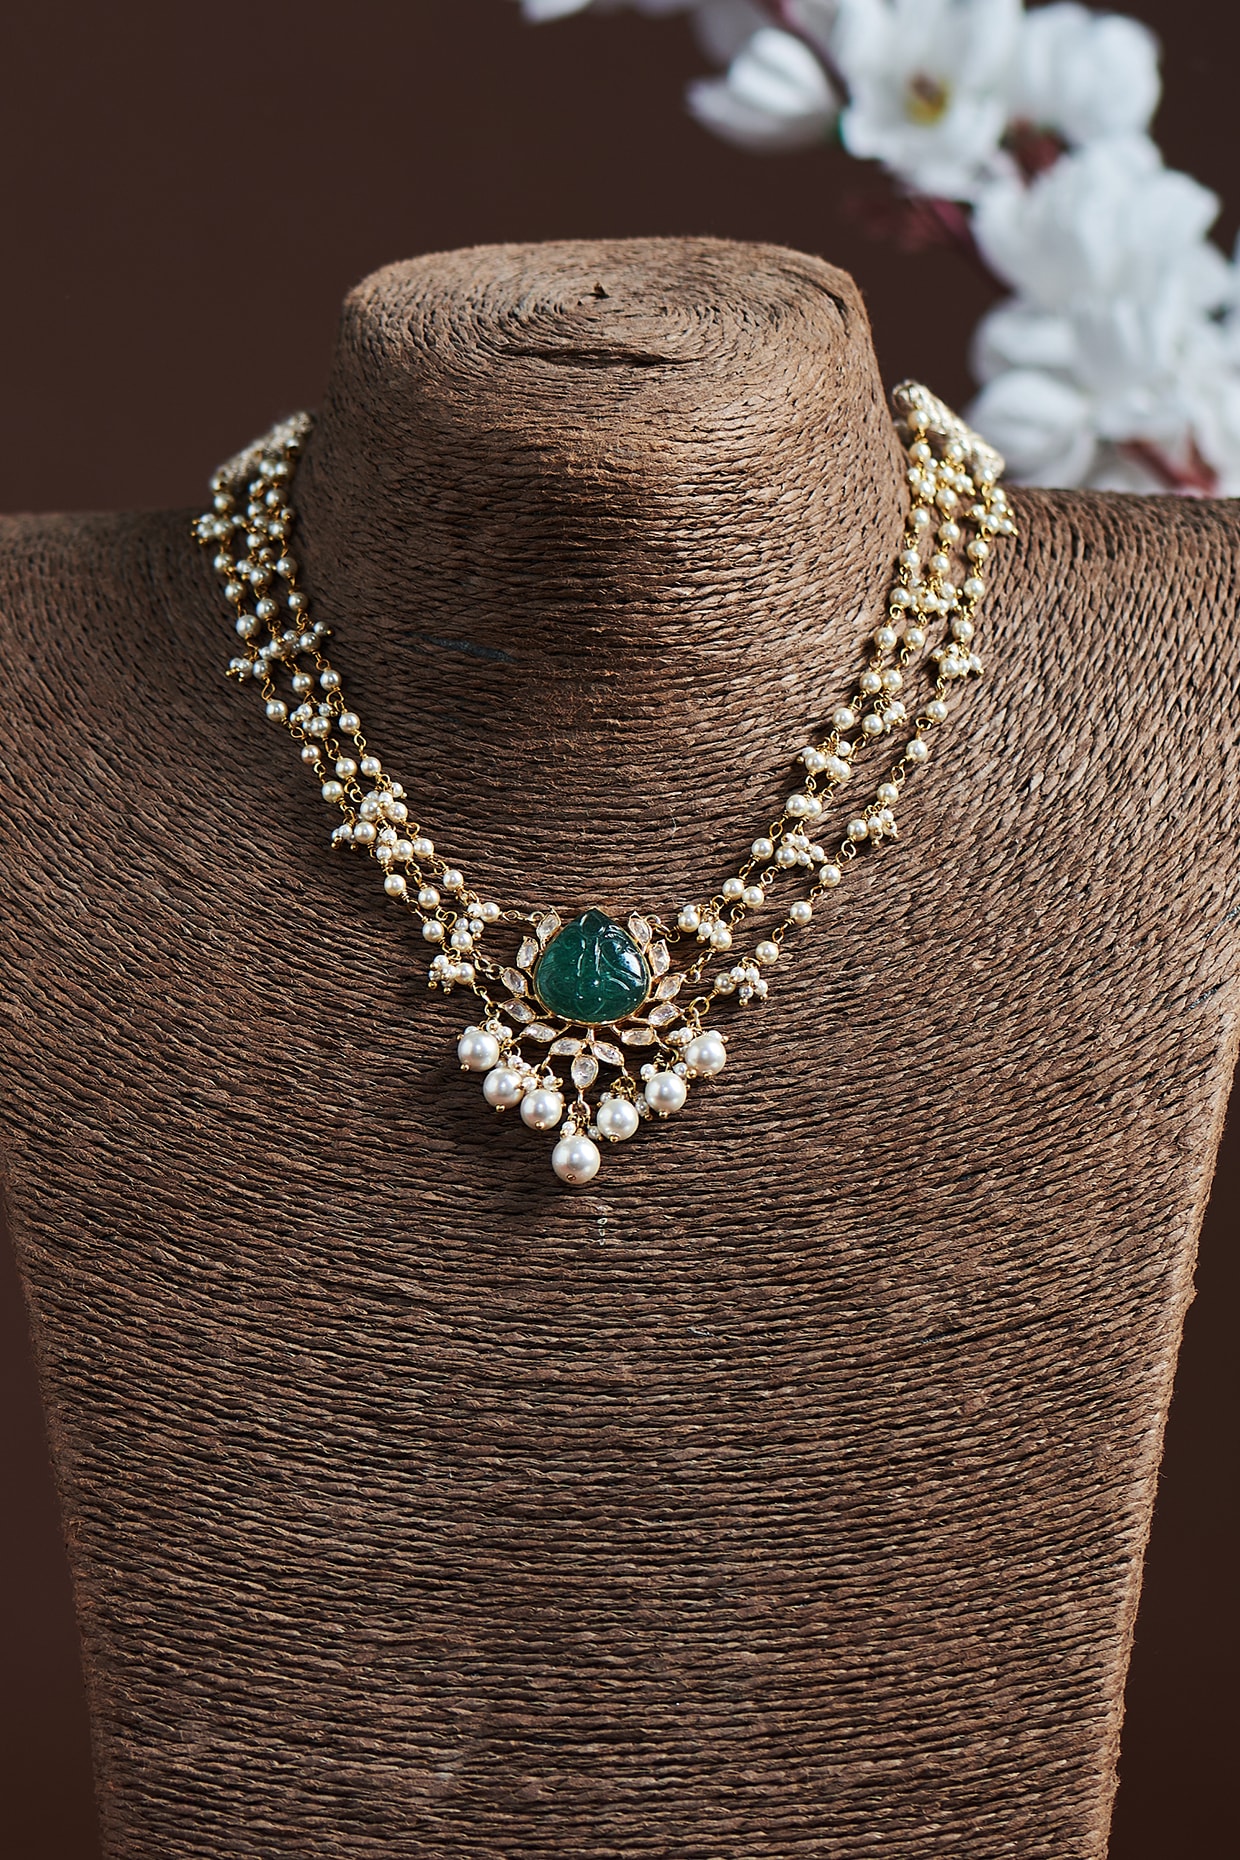 Vintage Pear Shape Emerald Bezel-Set Pendant in 18k Gold | Exquisite  Jewelry for Every Occasion | FWCJ